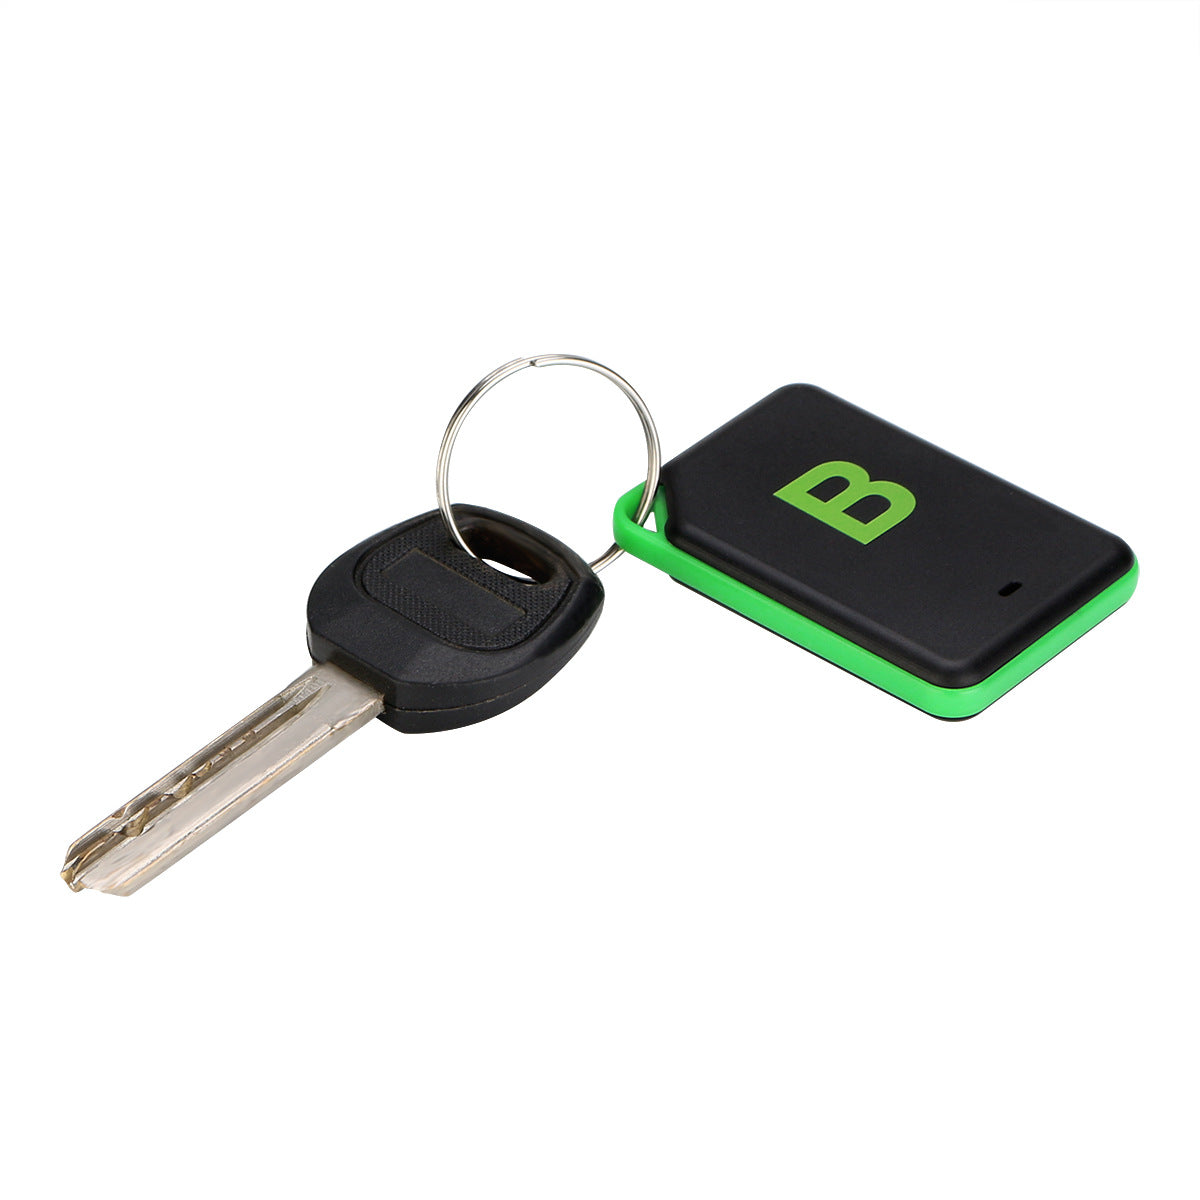 A car key is attached to a green locator labeled 'B', suggesting the device's use for finding keys.